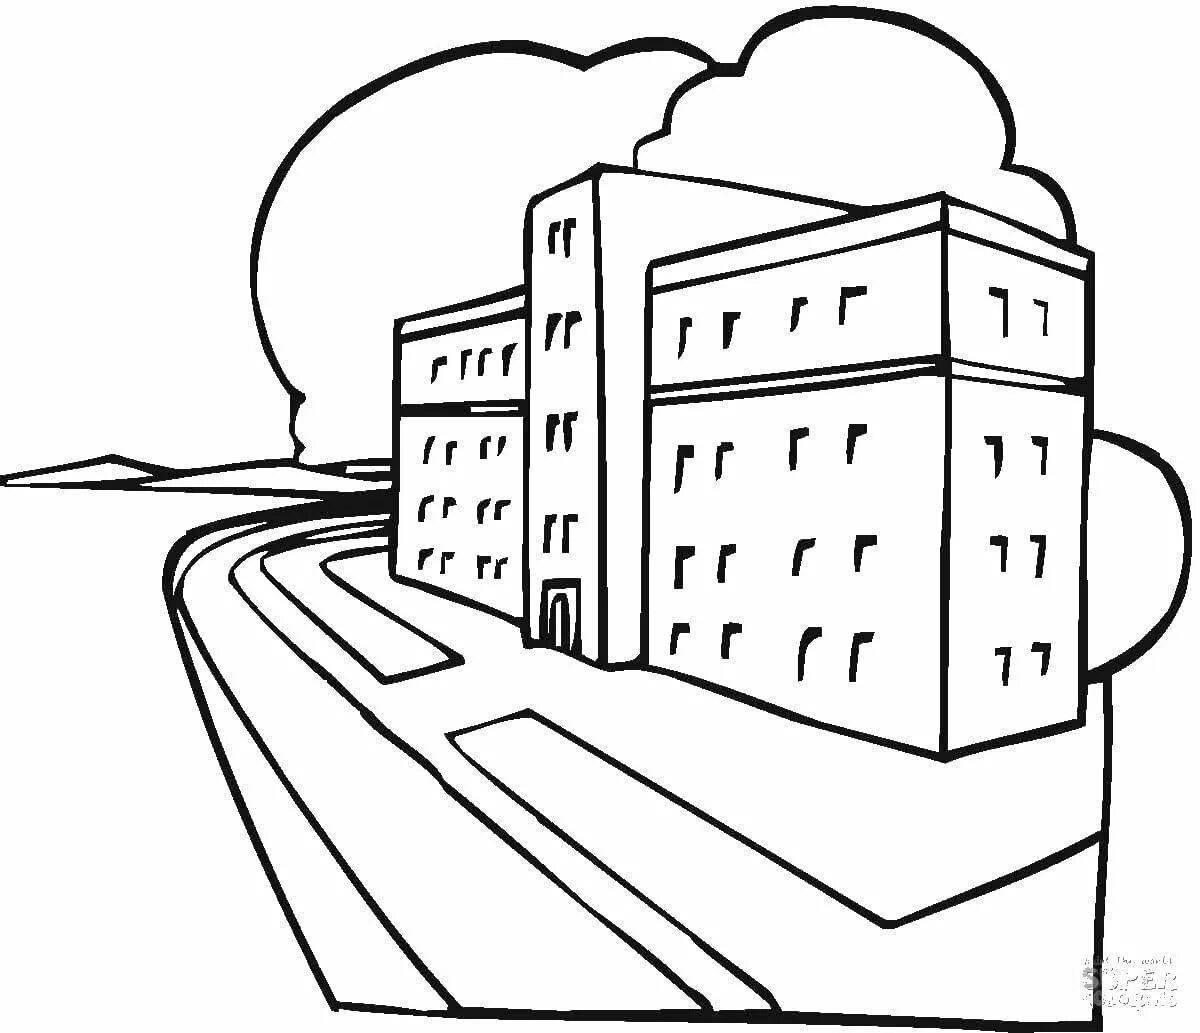 Coloring page nice city street